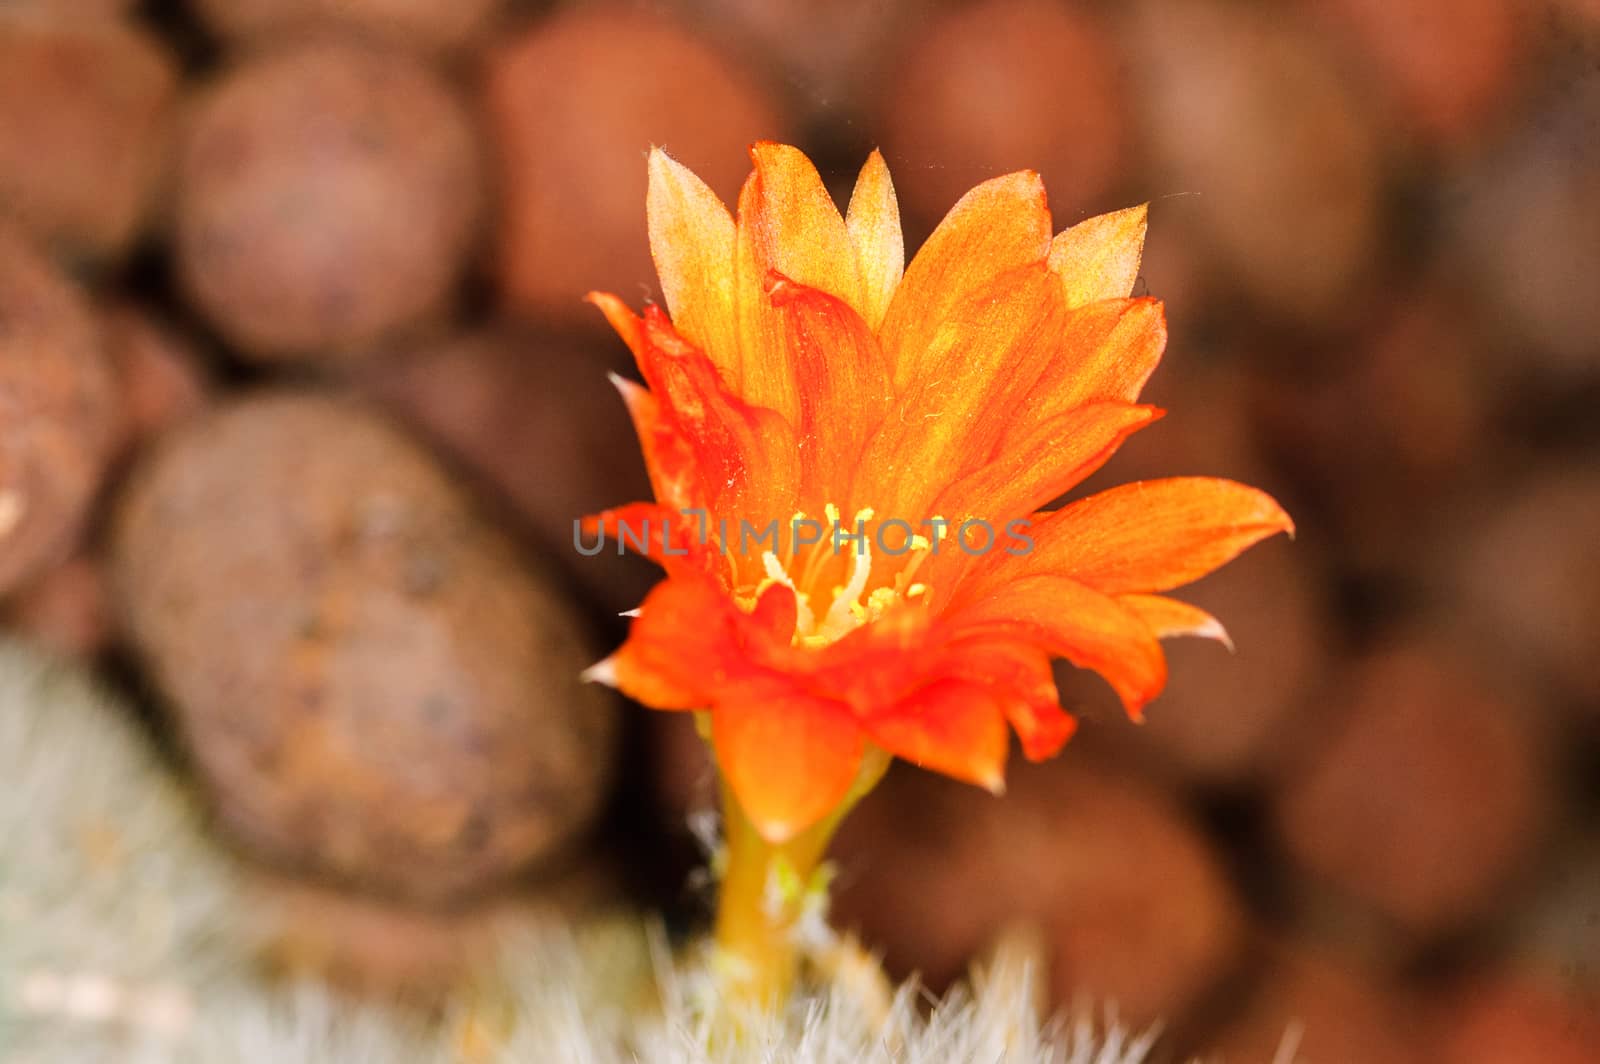 Blossom of a cactus by NuwatPhoto